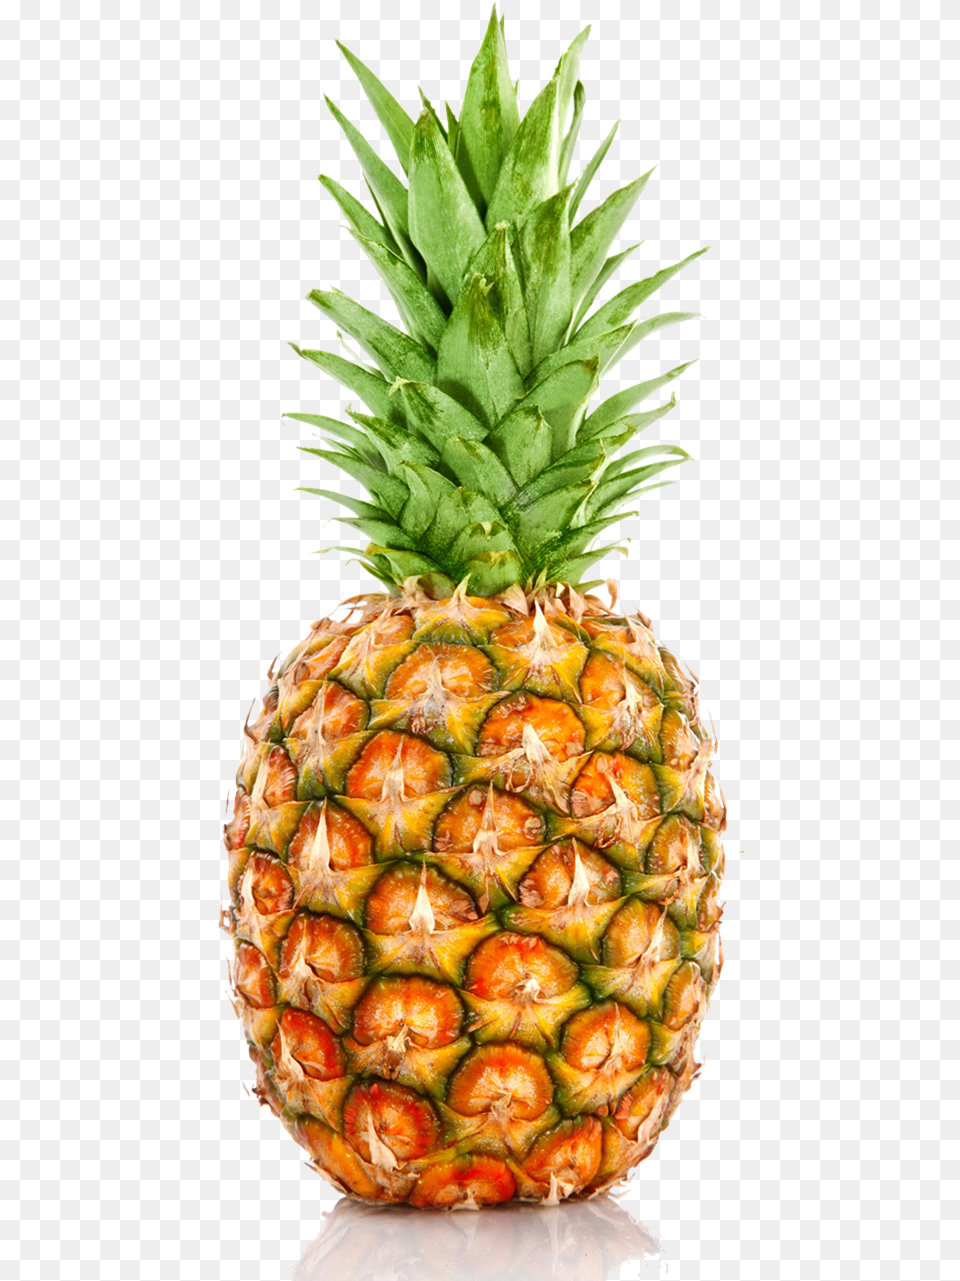 Download Hd Pineapple Background Individual Pictures Of Fruits And Vegetables, Food, Fruit, Plant, Produce Png